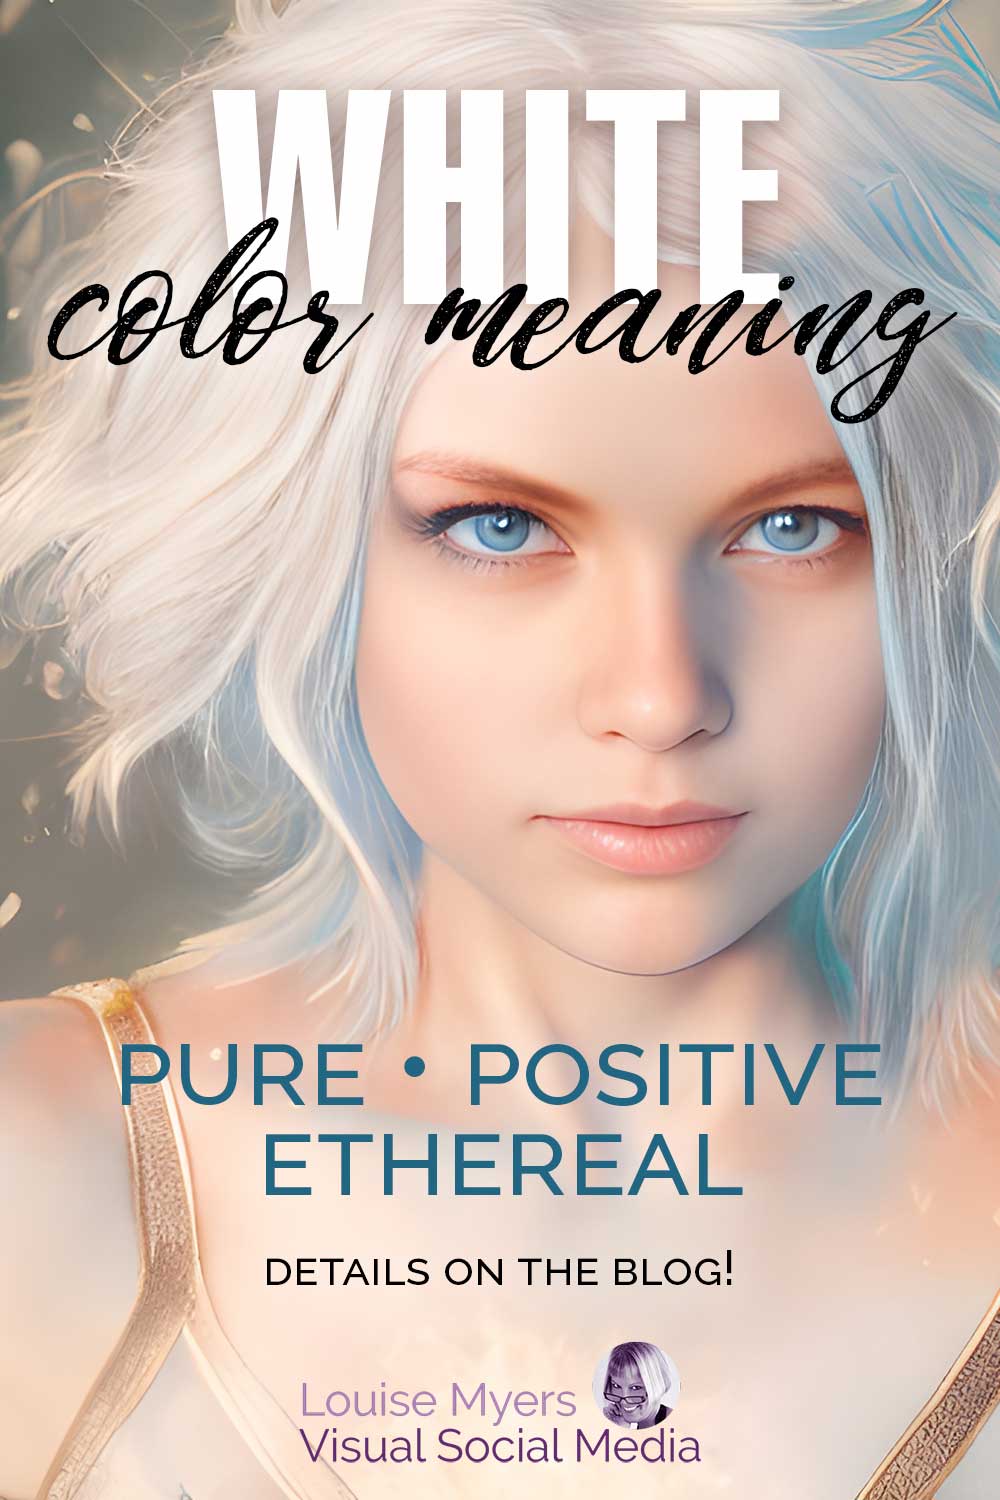 closeup of pretty young woman with white hair and aqua eyes has words, white color meaning, pure positive ethereal.